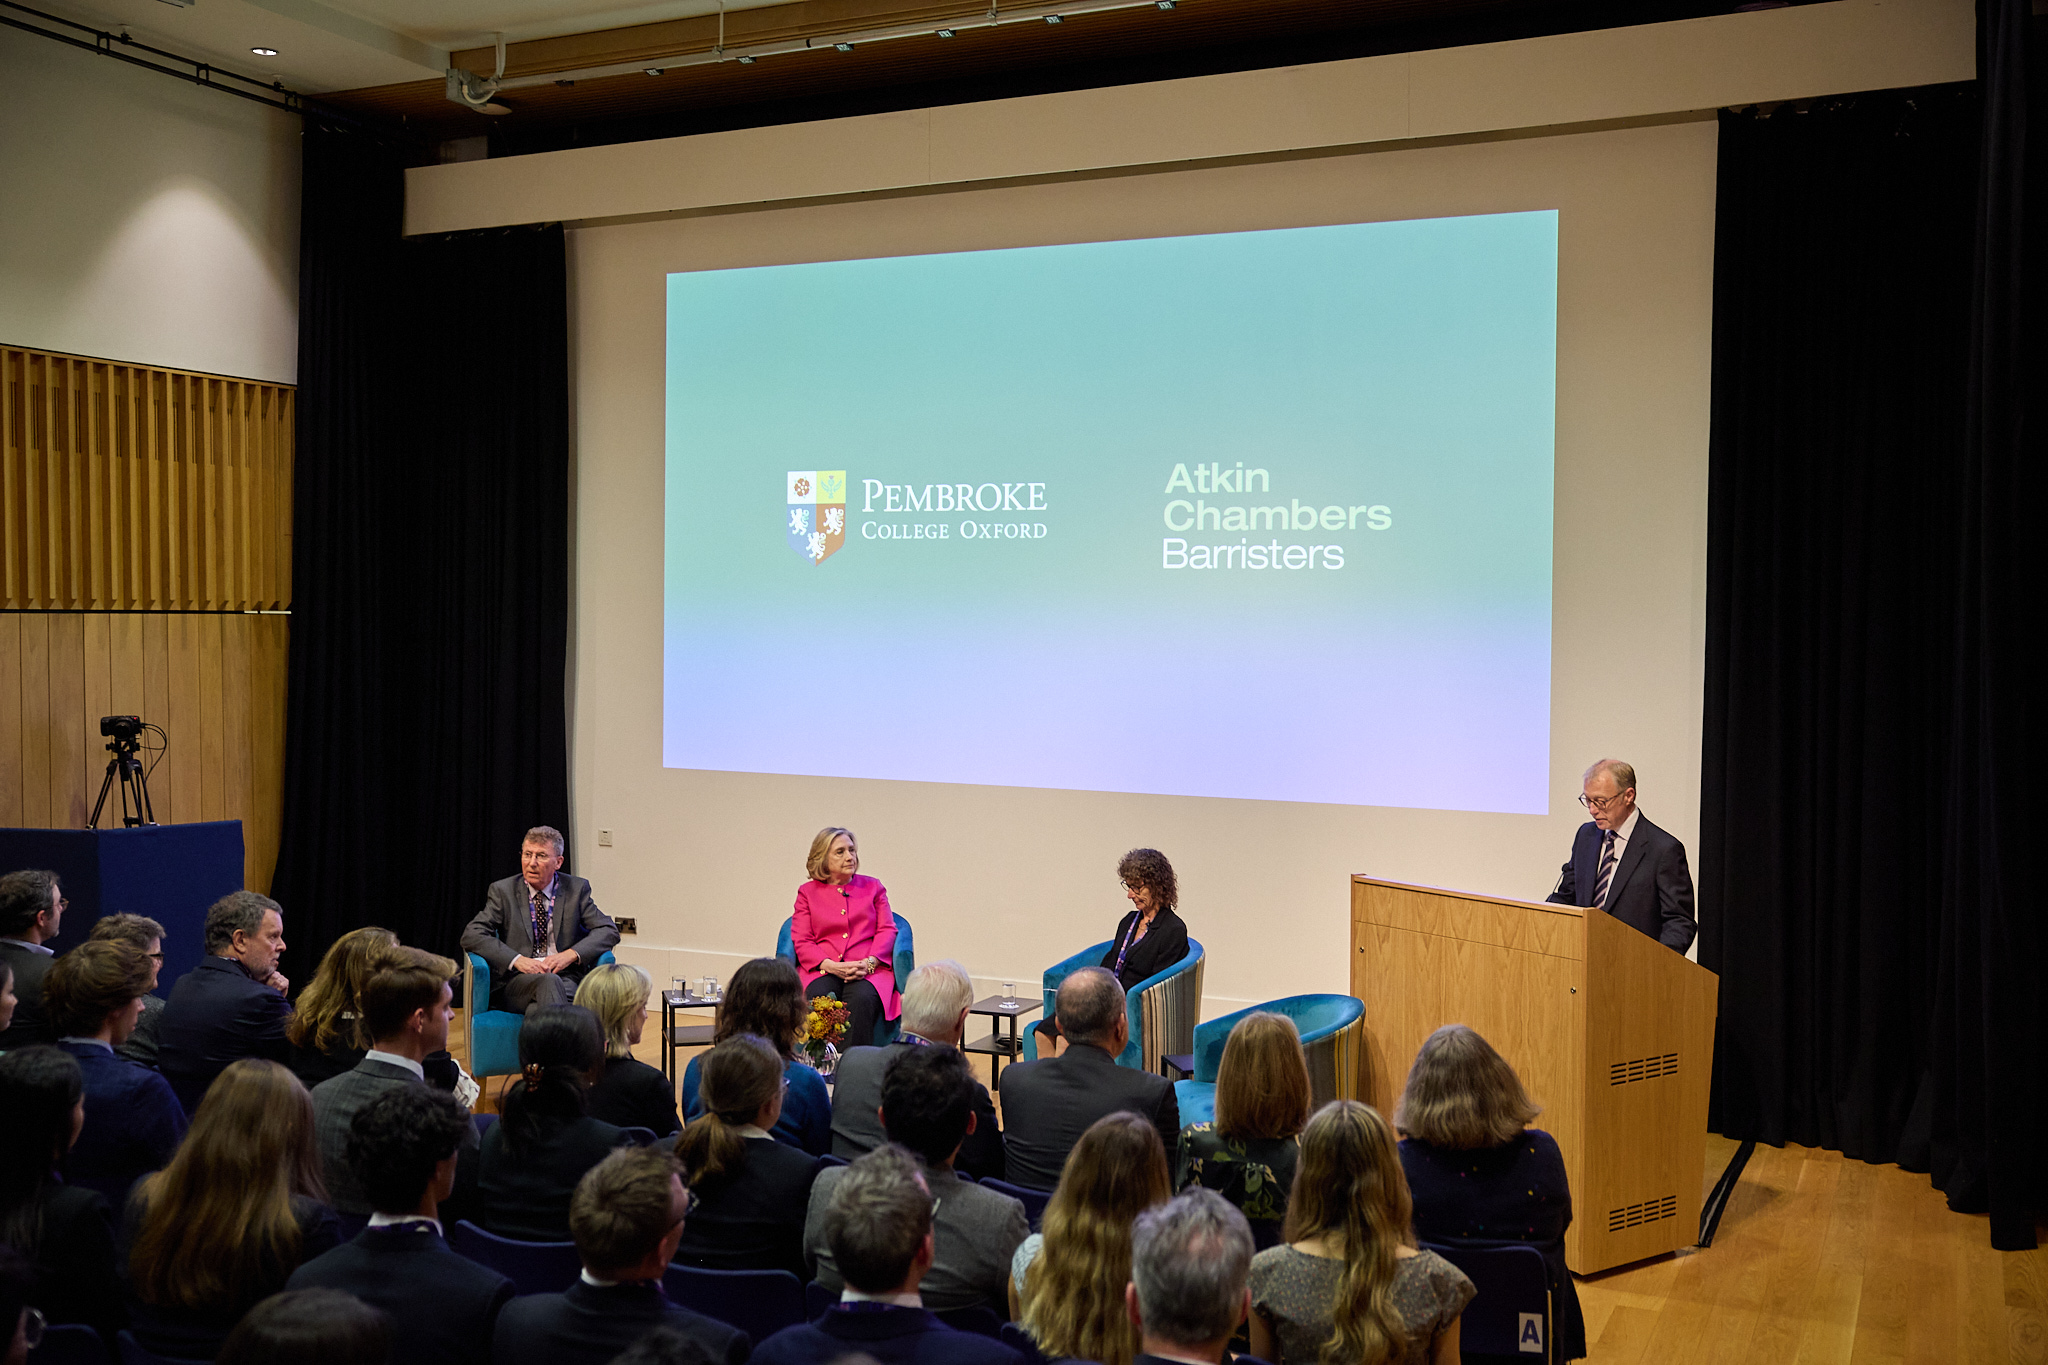 A distanced shot of the panel, with L-R: Professor Stephen Whitefield, Secretary Hillary Rodham Clinton, Professor Sandra Fredman and Sir Ernest Ryder.